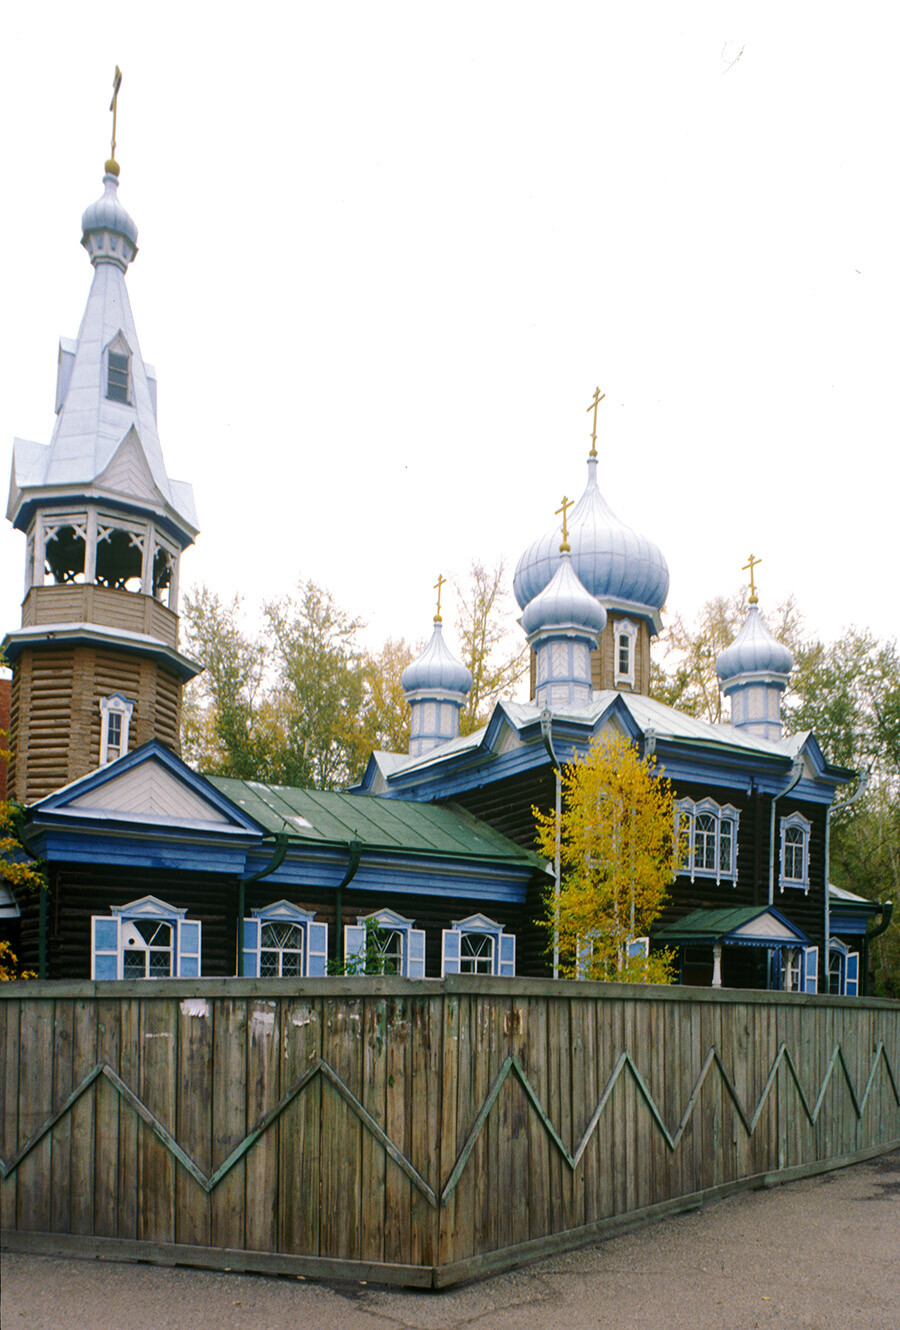 Old Believer Church of the Dormition, southwest view. Wooden structure built in 1909-13 for the Old Believer Orthodox community in Tomsk region. September 27, 1999